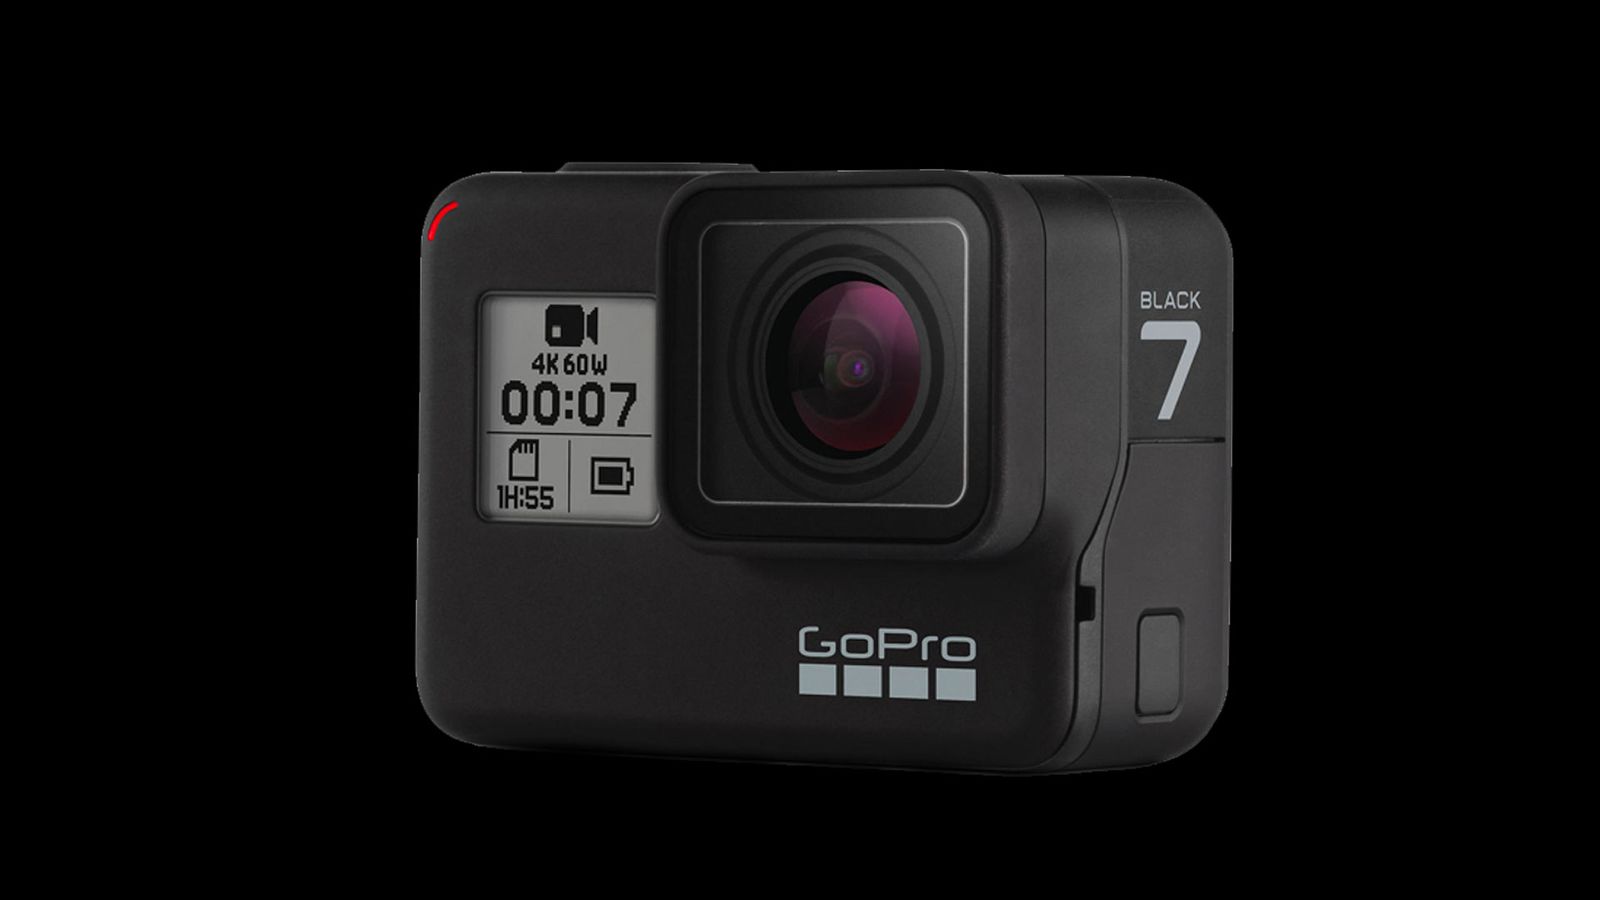 Best GoPro HERO7 product image of a black camera with a greyscale digital display on the front.